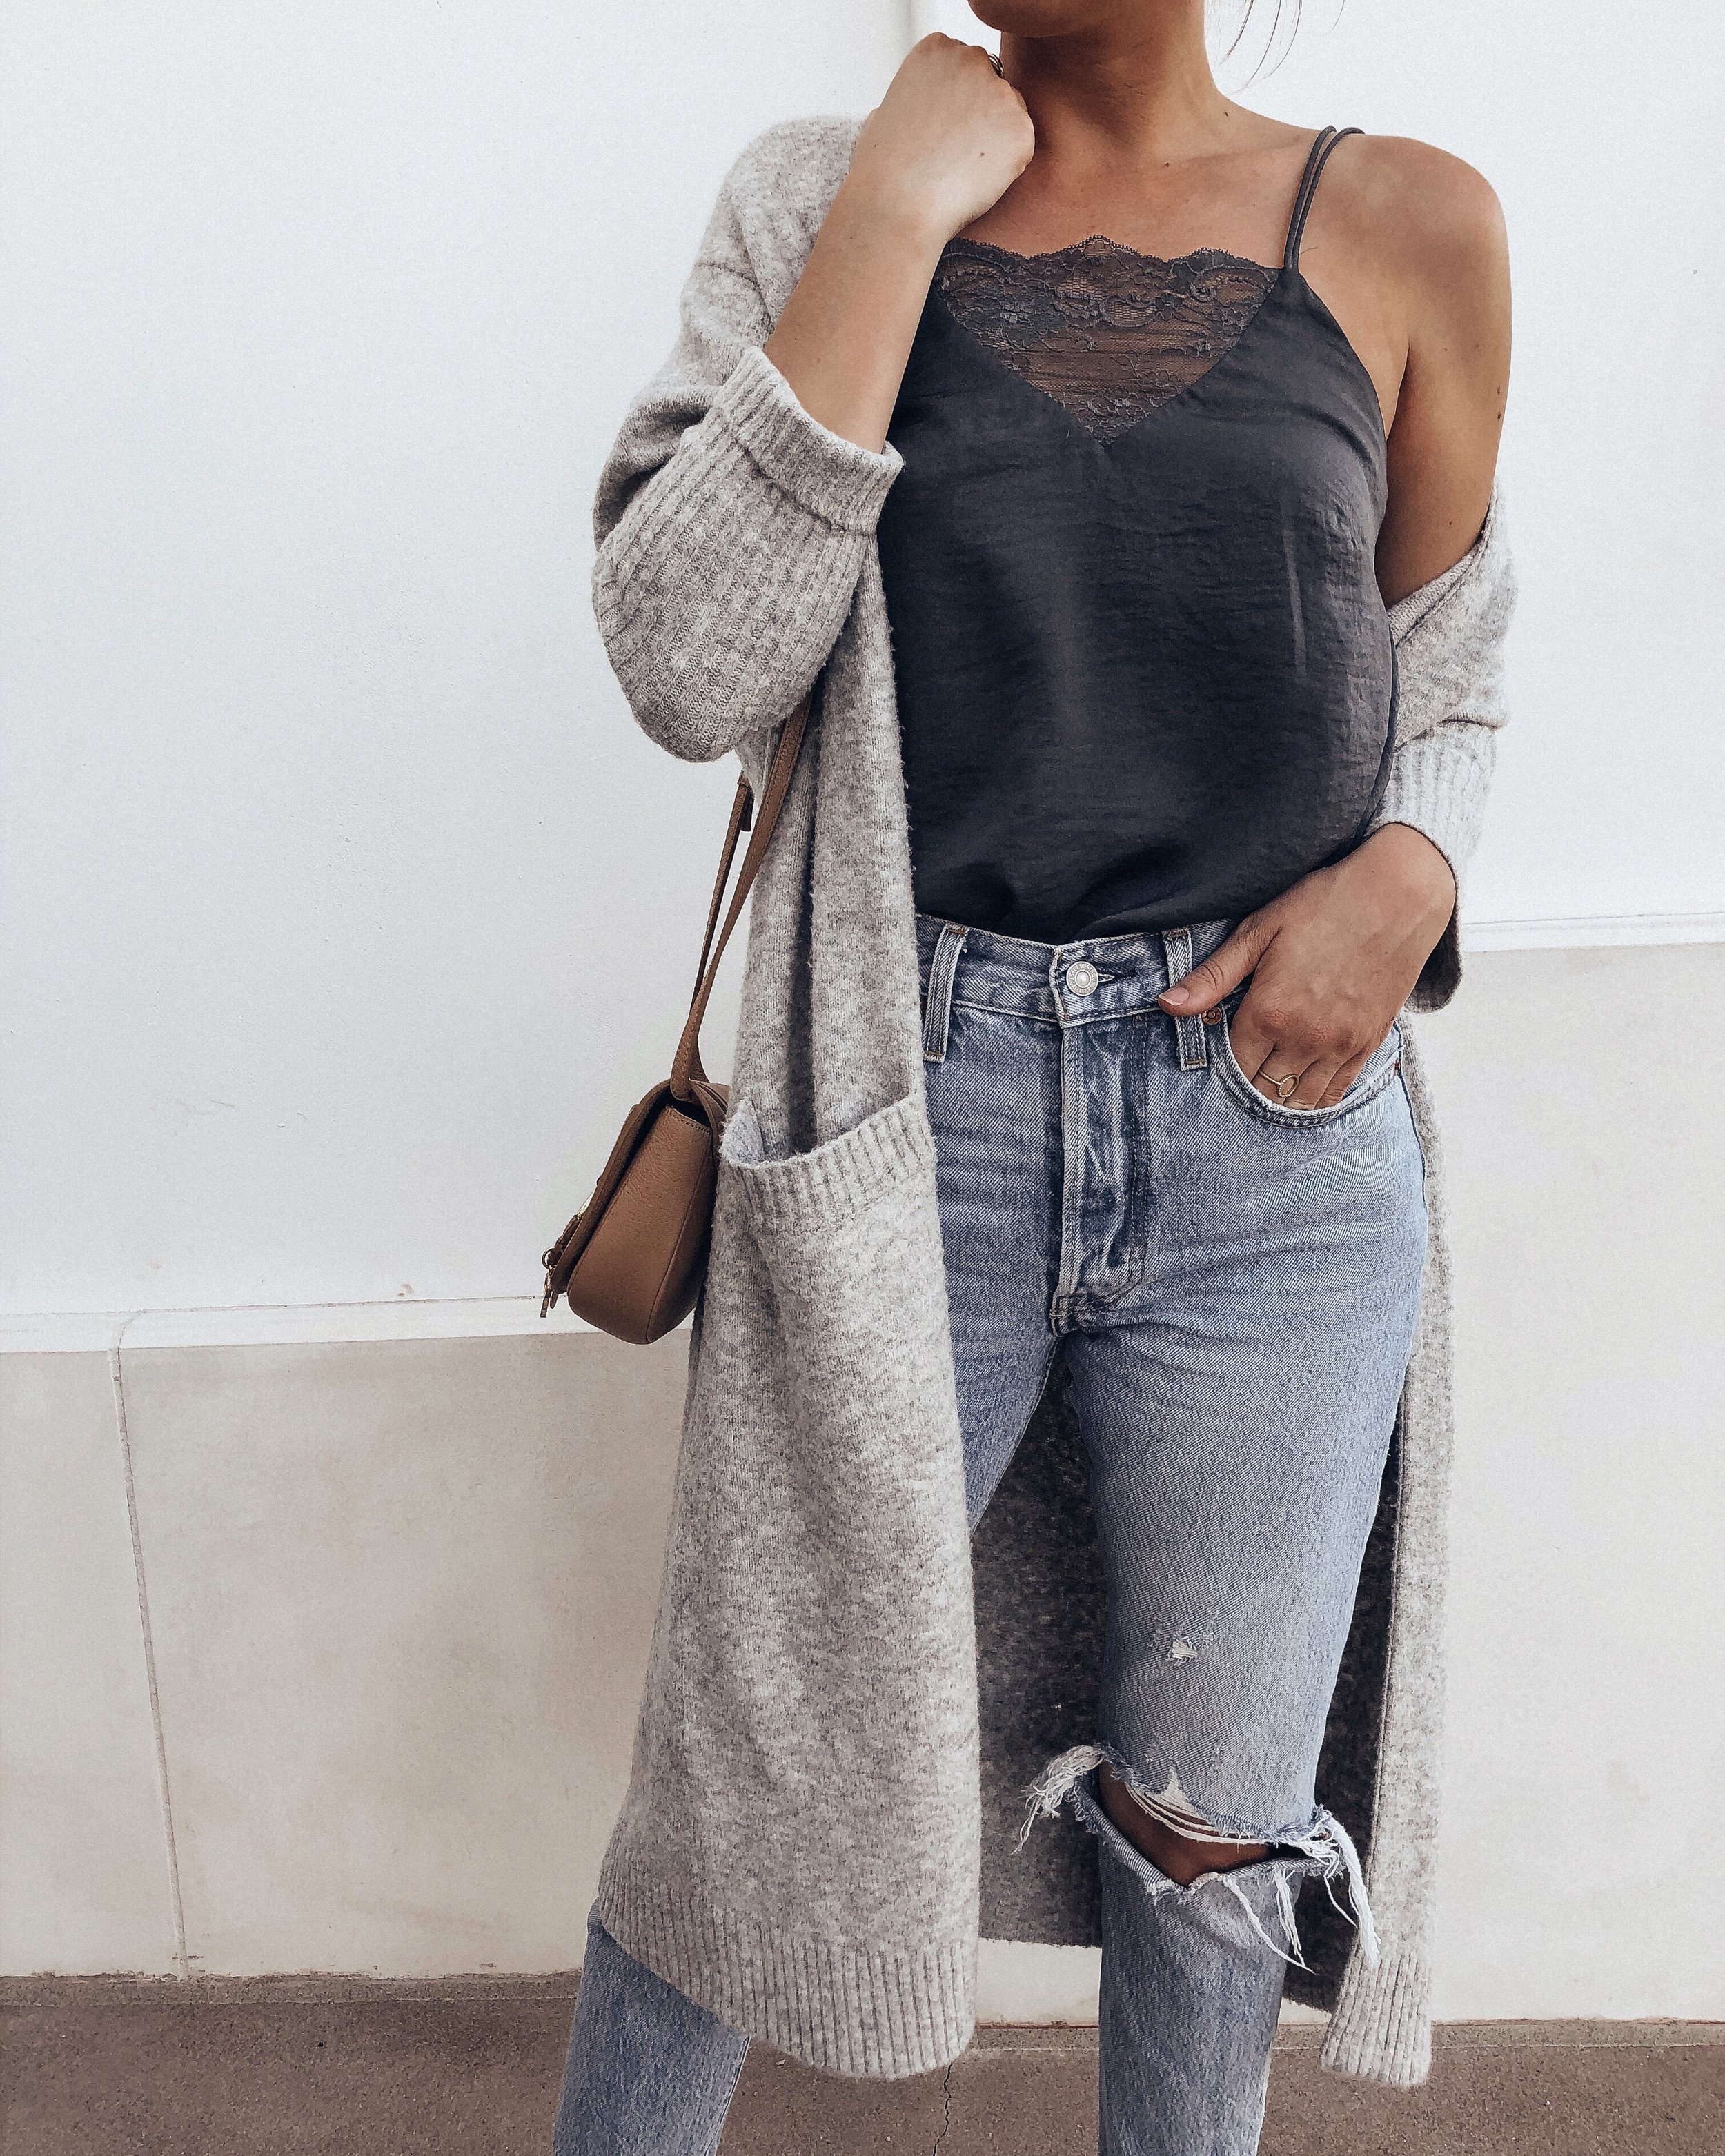 Navy Lace Cami and Grey Cardigan — Tyler Harless